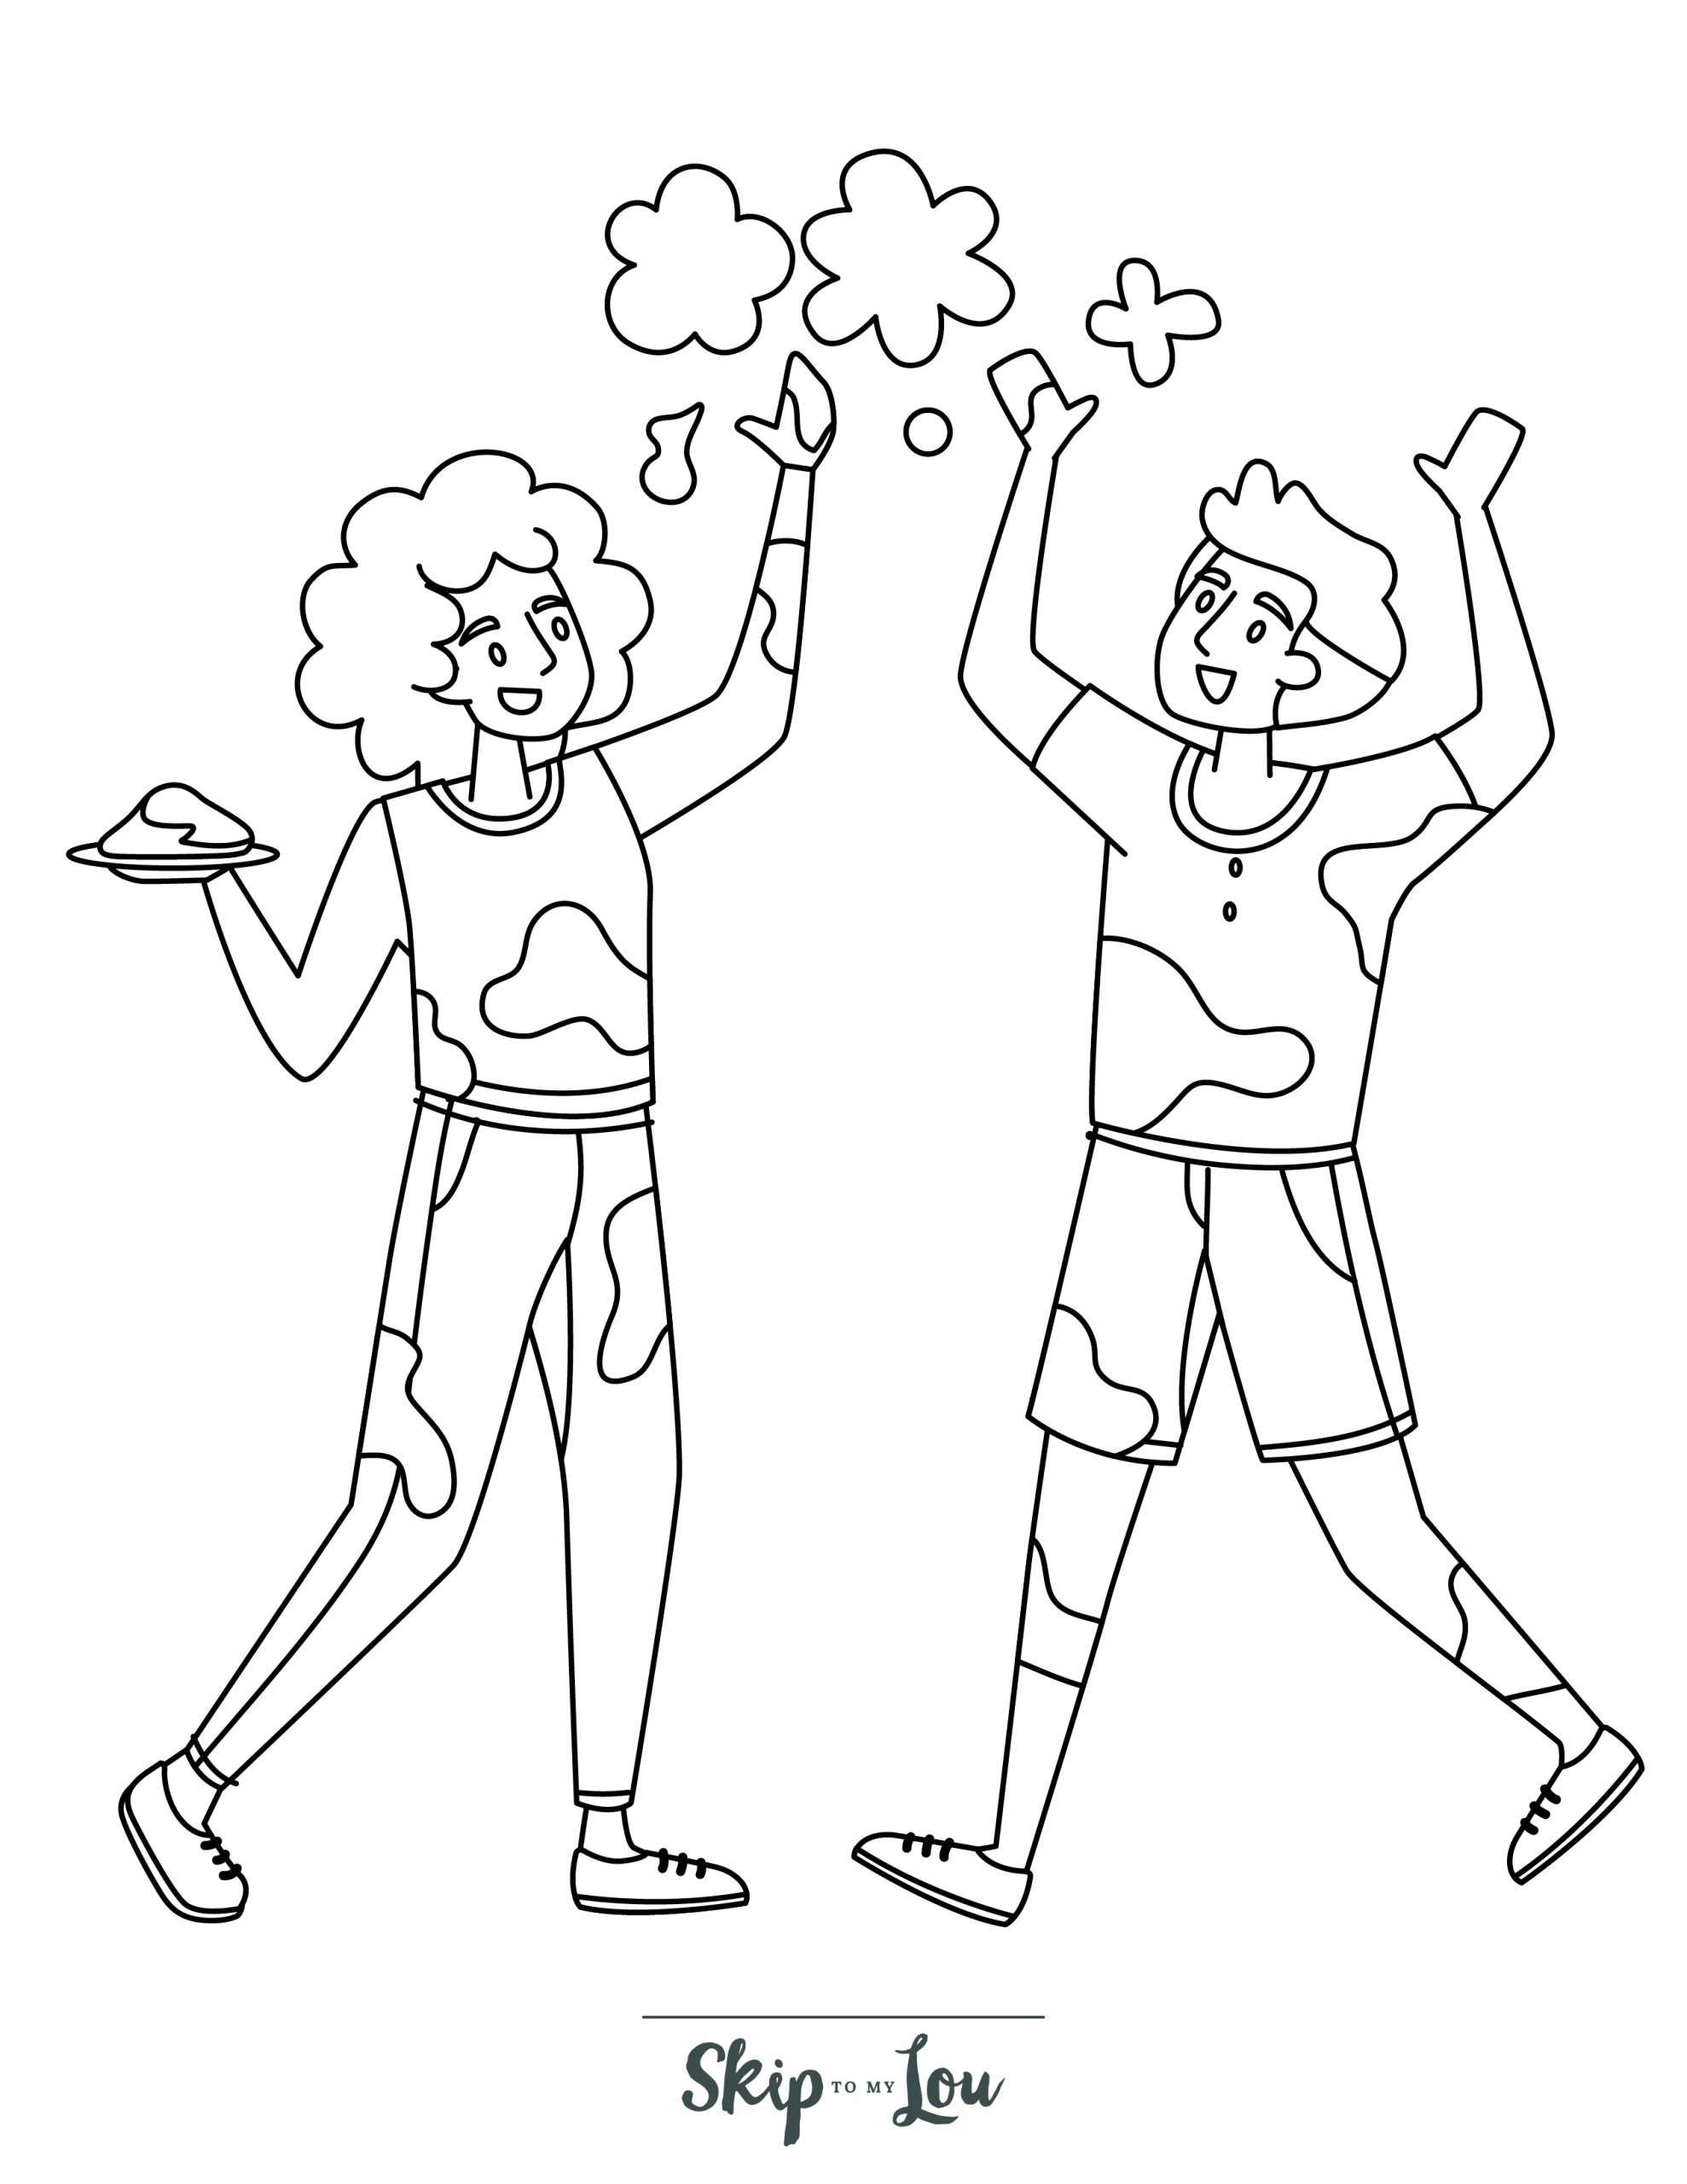 People Coloring Page 5 - Line drawing of happy couple playing together